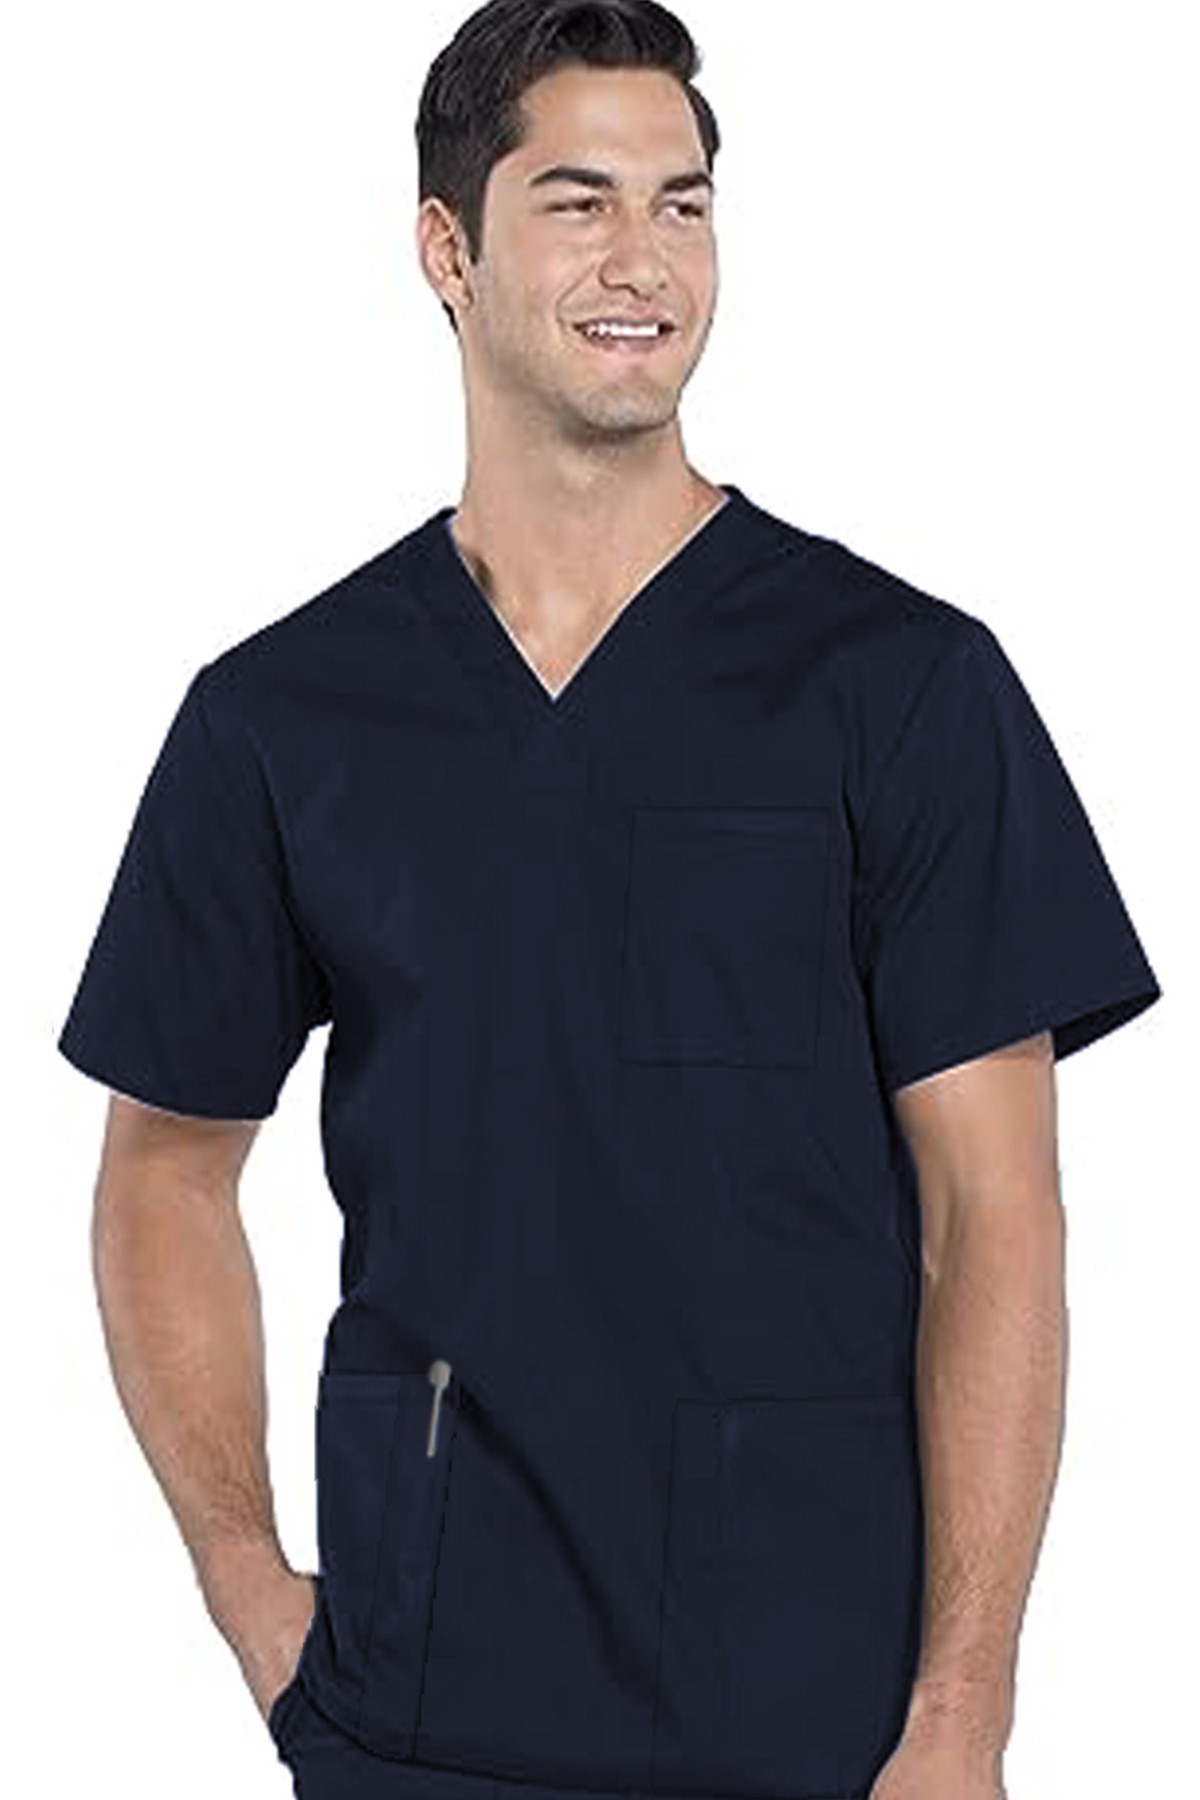 Only For USA CUSTOMERS Unisex Scrub Top V-Neck 3 Pockets with a Pencil Pocket Size M Color Navy